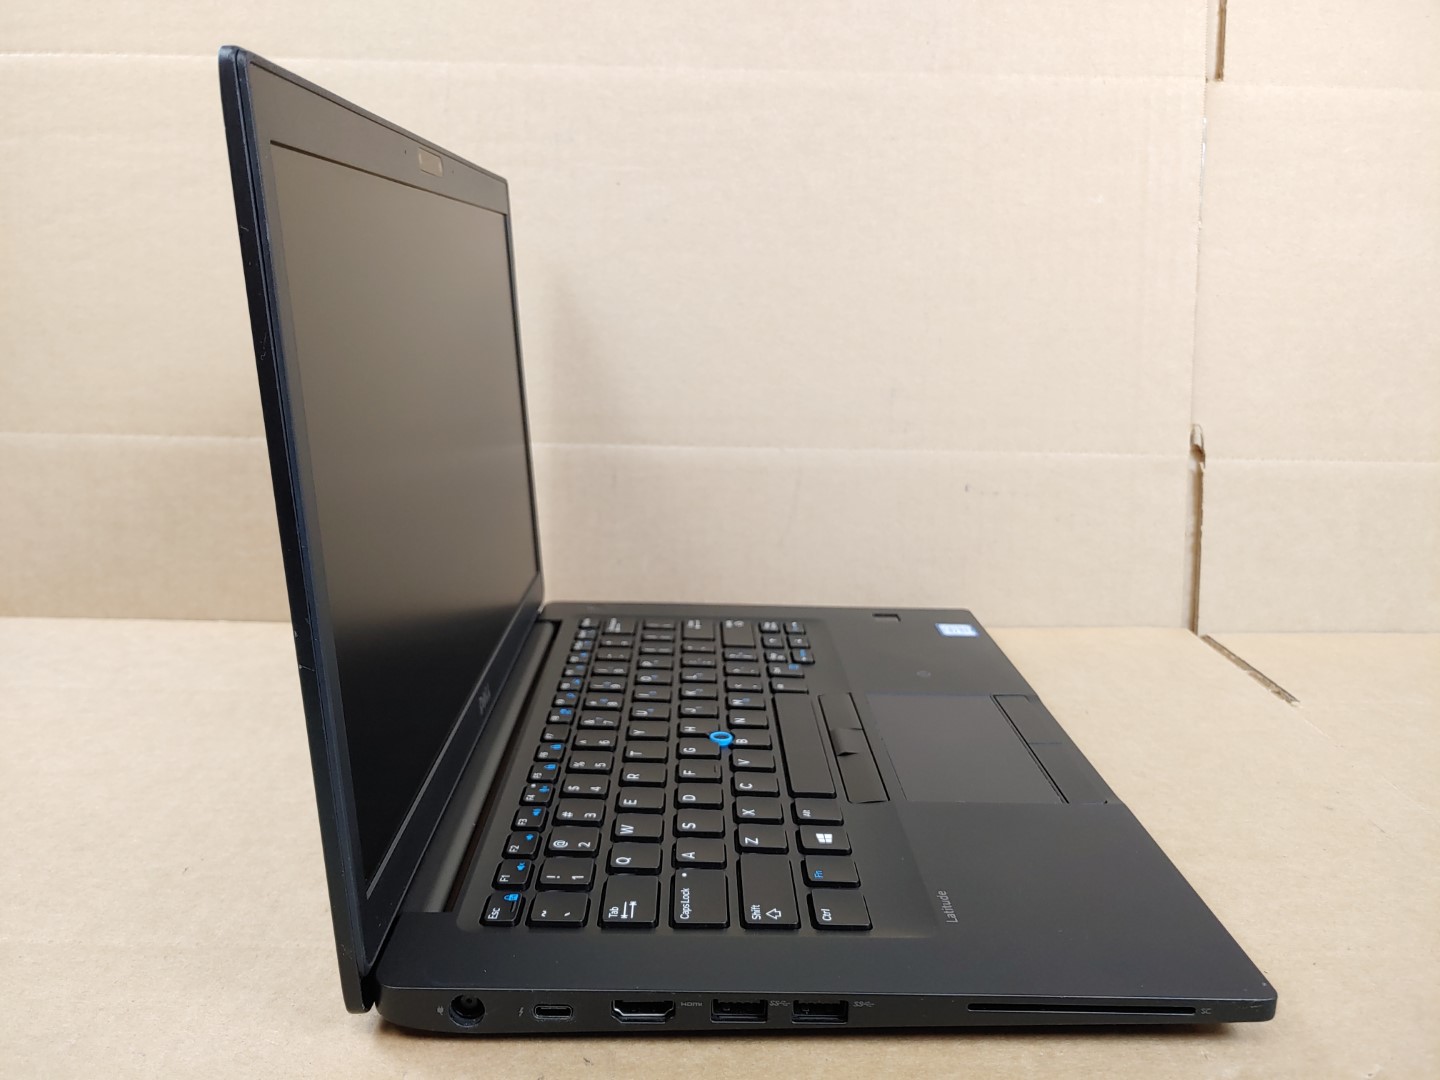 we have added actual images to this listing of the Dell Latitude you would receive. **NO POWER ADAPTER / NO BATTERY INSTALLED/ NO SSD ** Item Specifics: MPN : Latitude 7480UPC : N/AType : LaptopBrand : DellProduct Line : LatitudeModel : Latitude 7480Operating System : N/AScreen Size : 14-inch FHDProcessor Type : Intel Core i7-7600U 7th GenProcessor Speed : 2.80GHzGraphics Processing Type : Intel Kabylake GraphicsMemory : 8GBHard Drive Capacity : N/A - 1